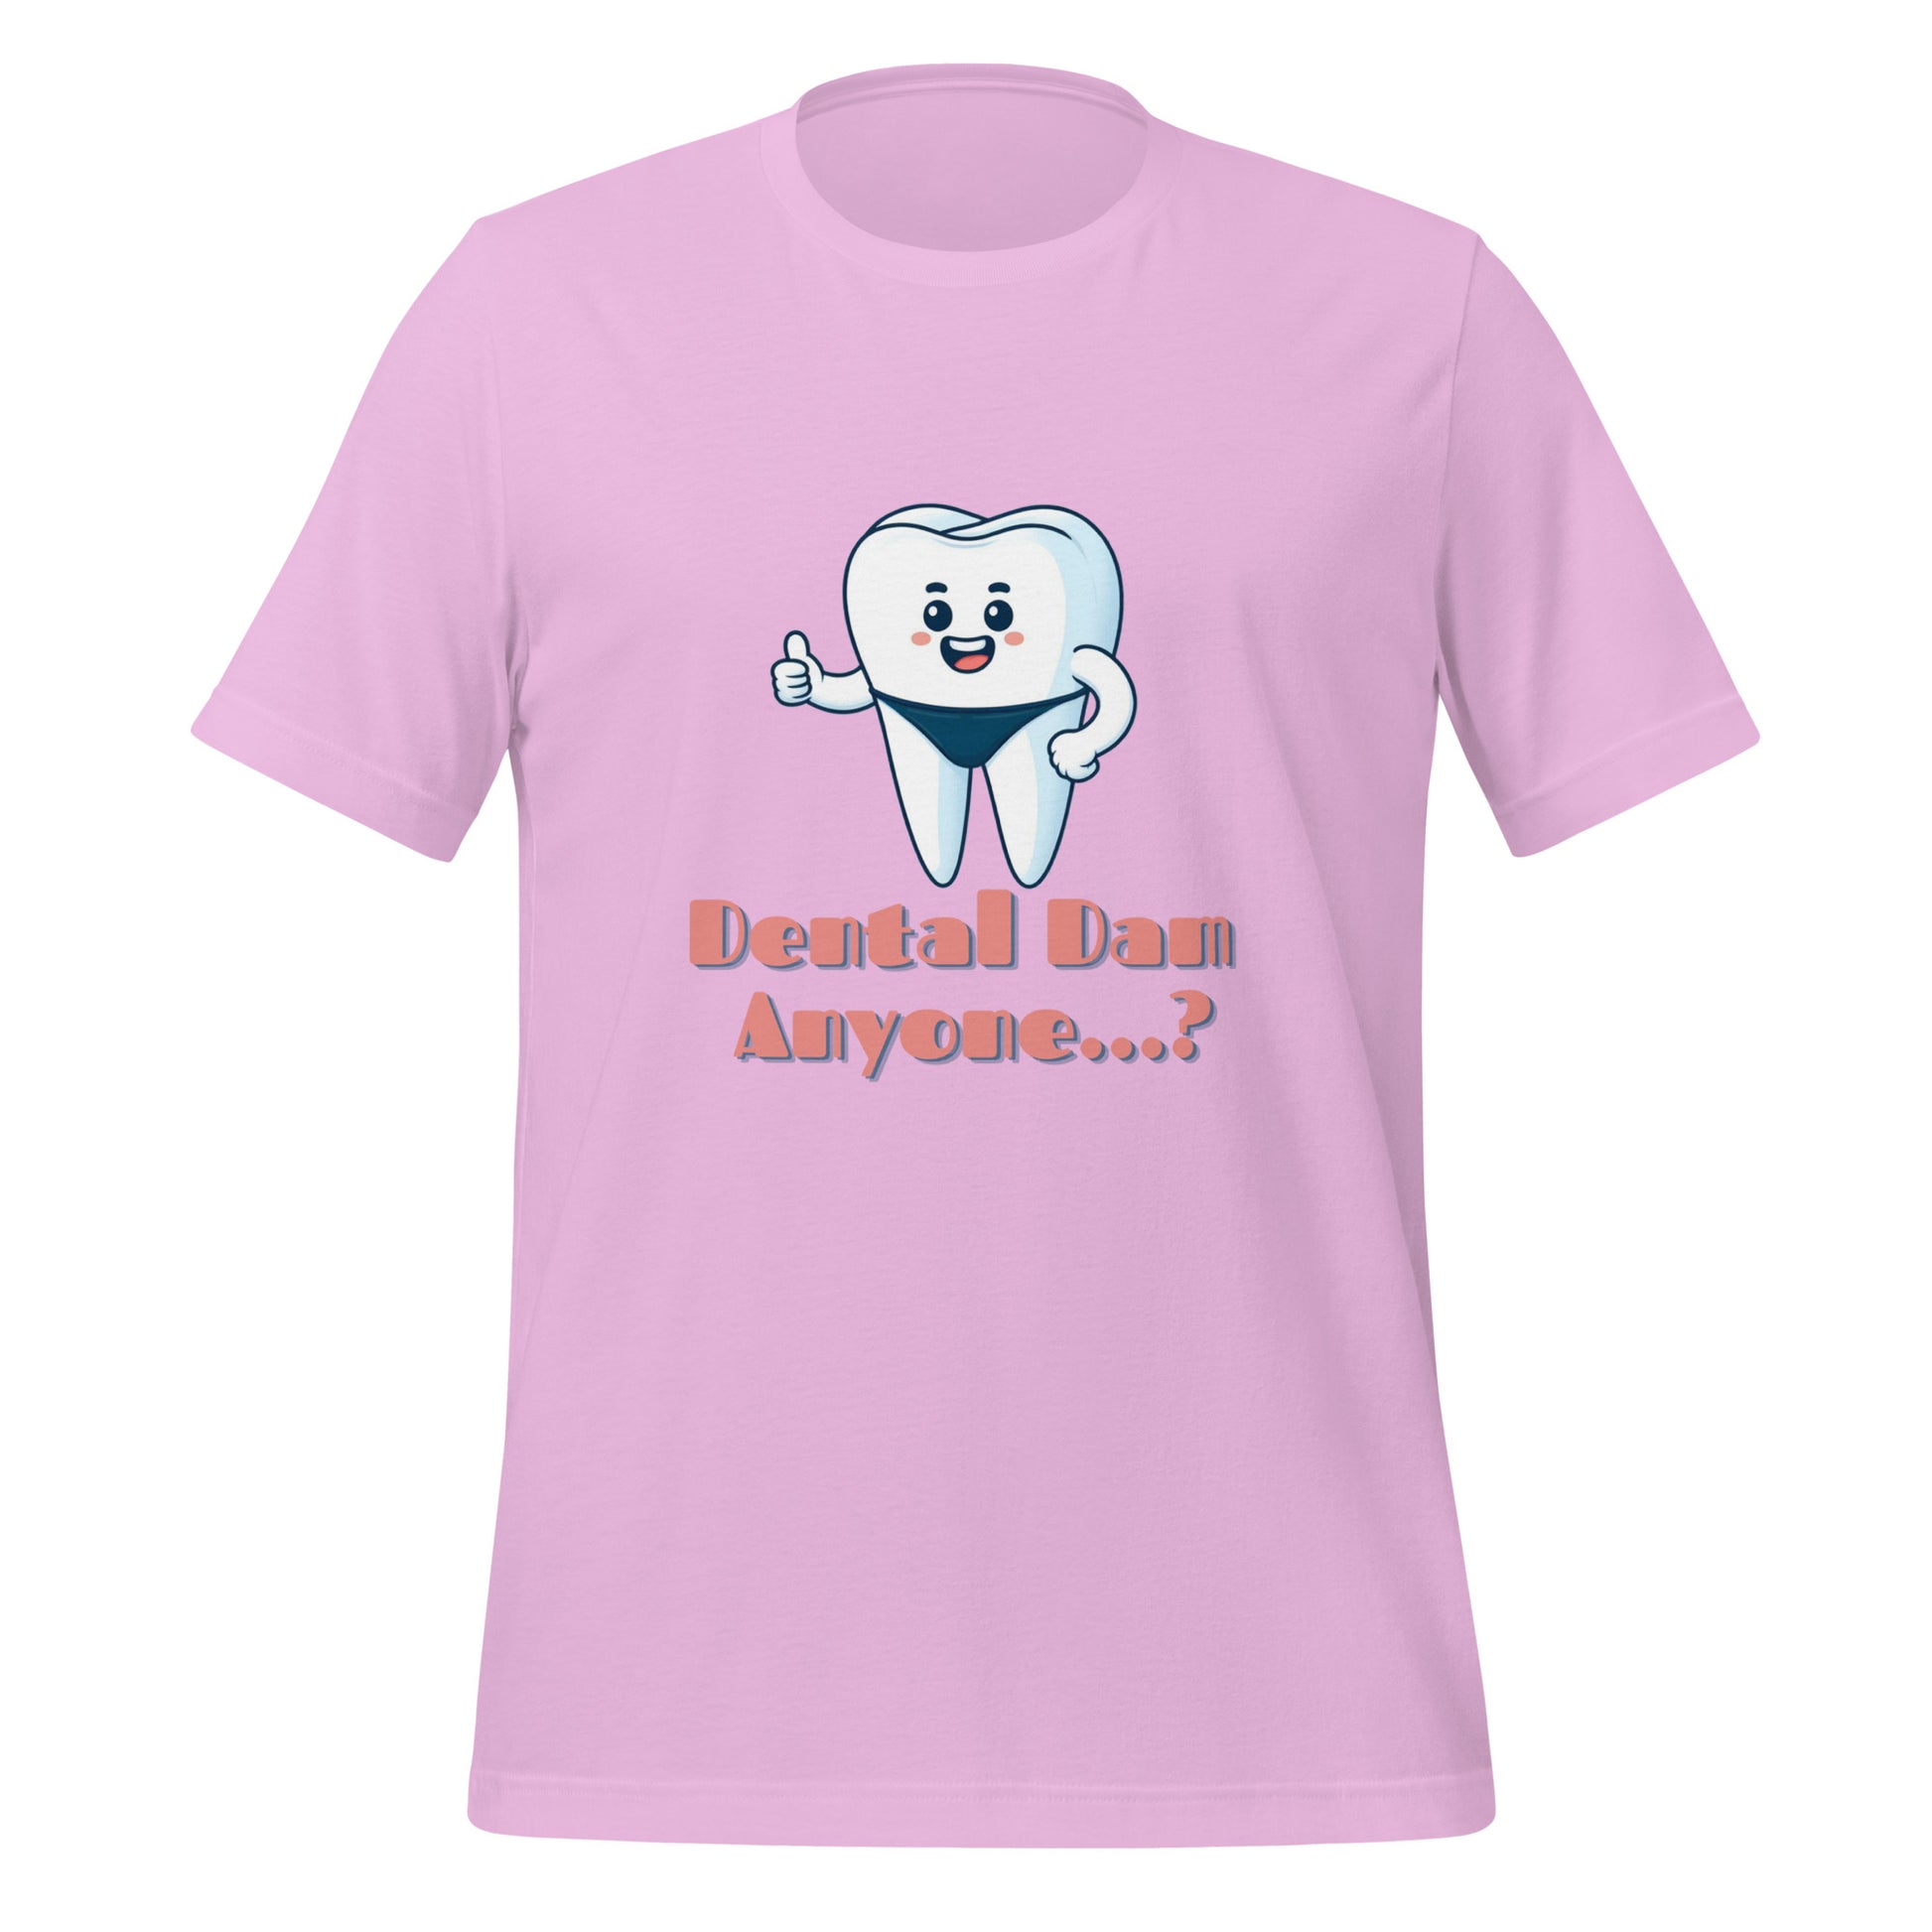 Funny dental shirt featuring a playful tooth character in a speedo with the text ‘Dental Dam Anyone?’, perfect for dentists, dental hygienists, and dental students who enjoy dental humor. This dental shirt is a unique addition to any dental professional’s wardrobe, making it an ideal dental office shirt. Don’t miss out on our dental assistant shirts and dental hygiene shirts. Lilac color.